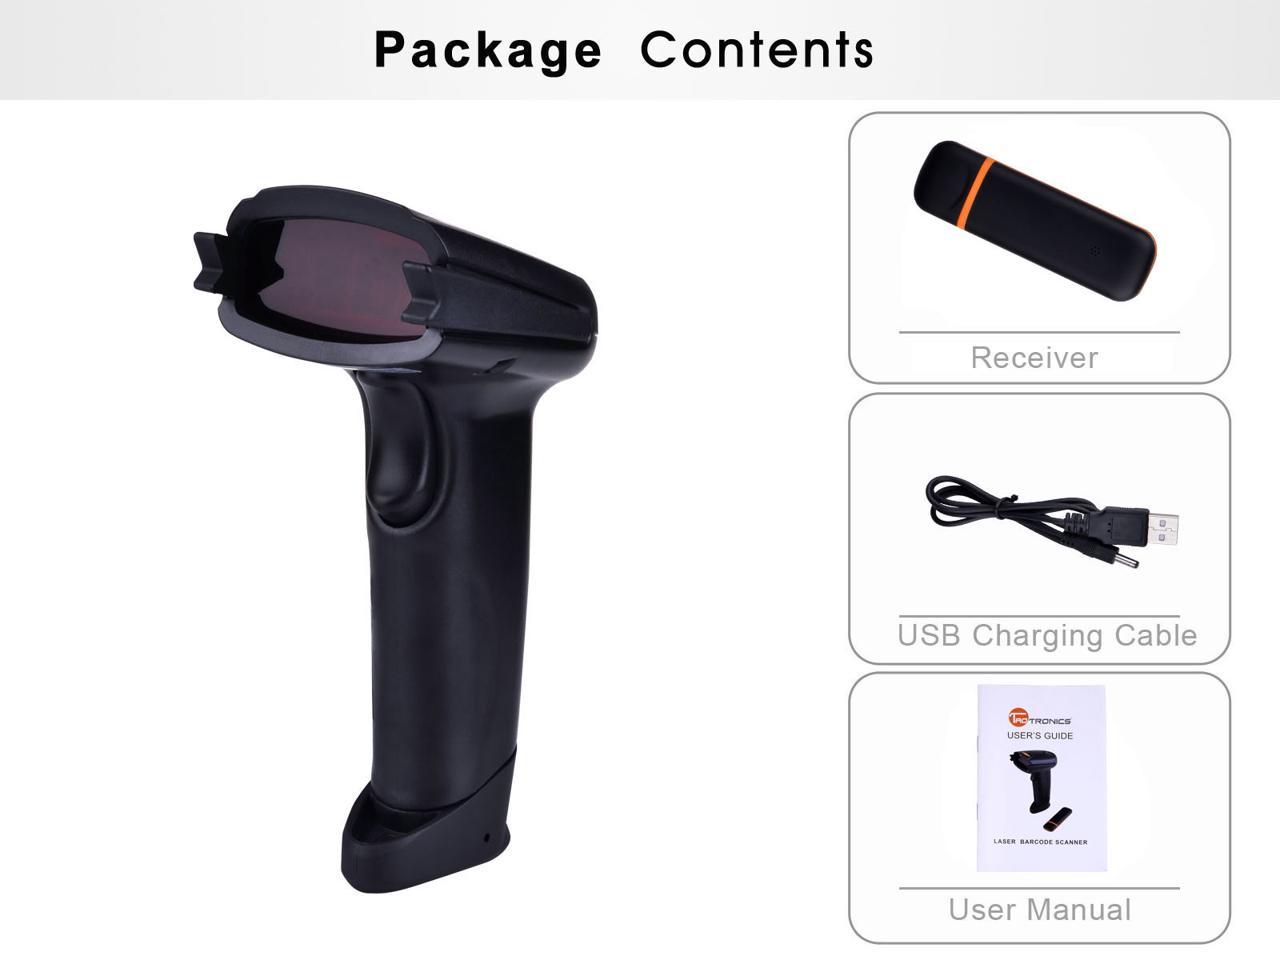 Mobile Moveable Optical Laser Portable 2.4GHz Cordless Handheld Bar Code Reader with USB Receiver Short Range TaoTronics Wireless Barcode Scanner Anti-Interference Kit 32-Bit Decoder